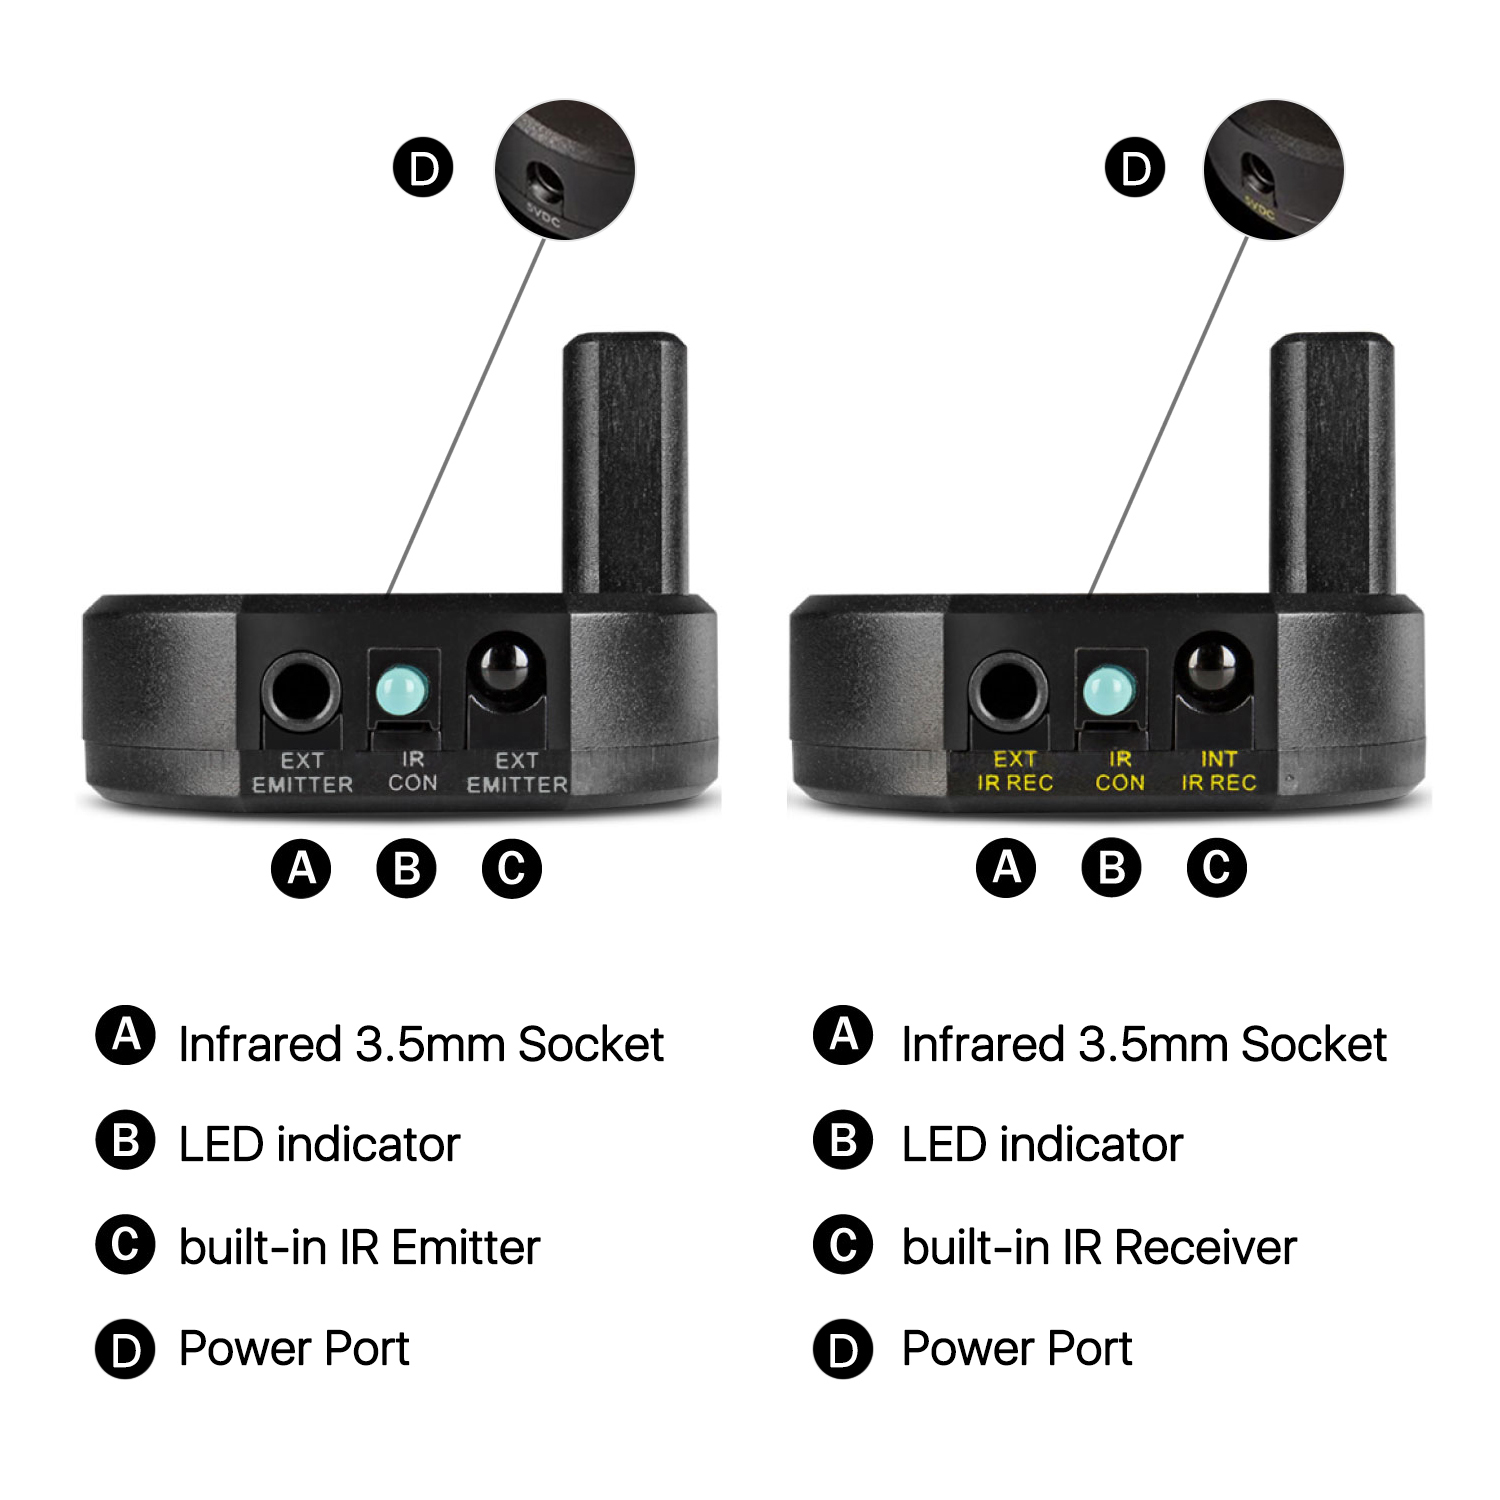 Universal IR Receiver Extender Compatibility - Dual Band IR receiver recognizes frequency ranges from 20 to 60 kHz; compatible with most IR-equipped remote devices, IR extender for cable box, smart TV / TVs, satellite receivers, audio/Hi-Fi stereo extenders, home theaters, even your front gate!